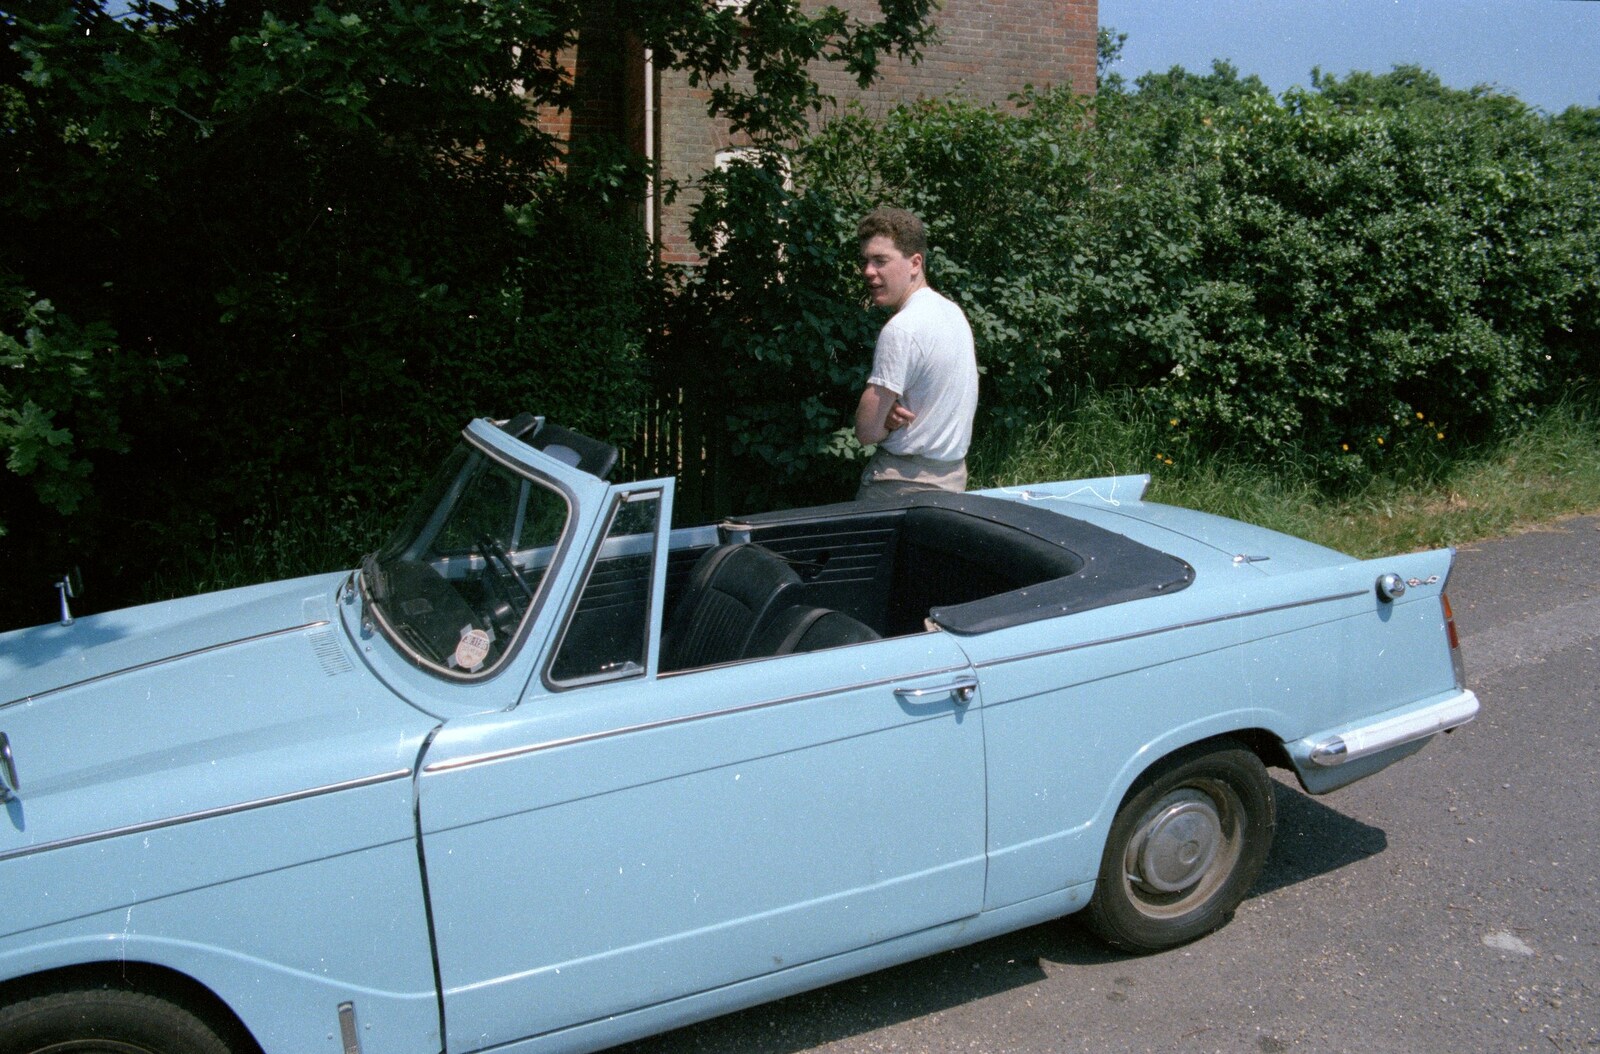 Jon and his baby-blue Triumph Herald from A Ford Cottage Miscellany, Barton on Sea, Hampshire - 7th July 1986